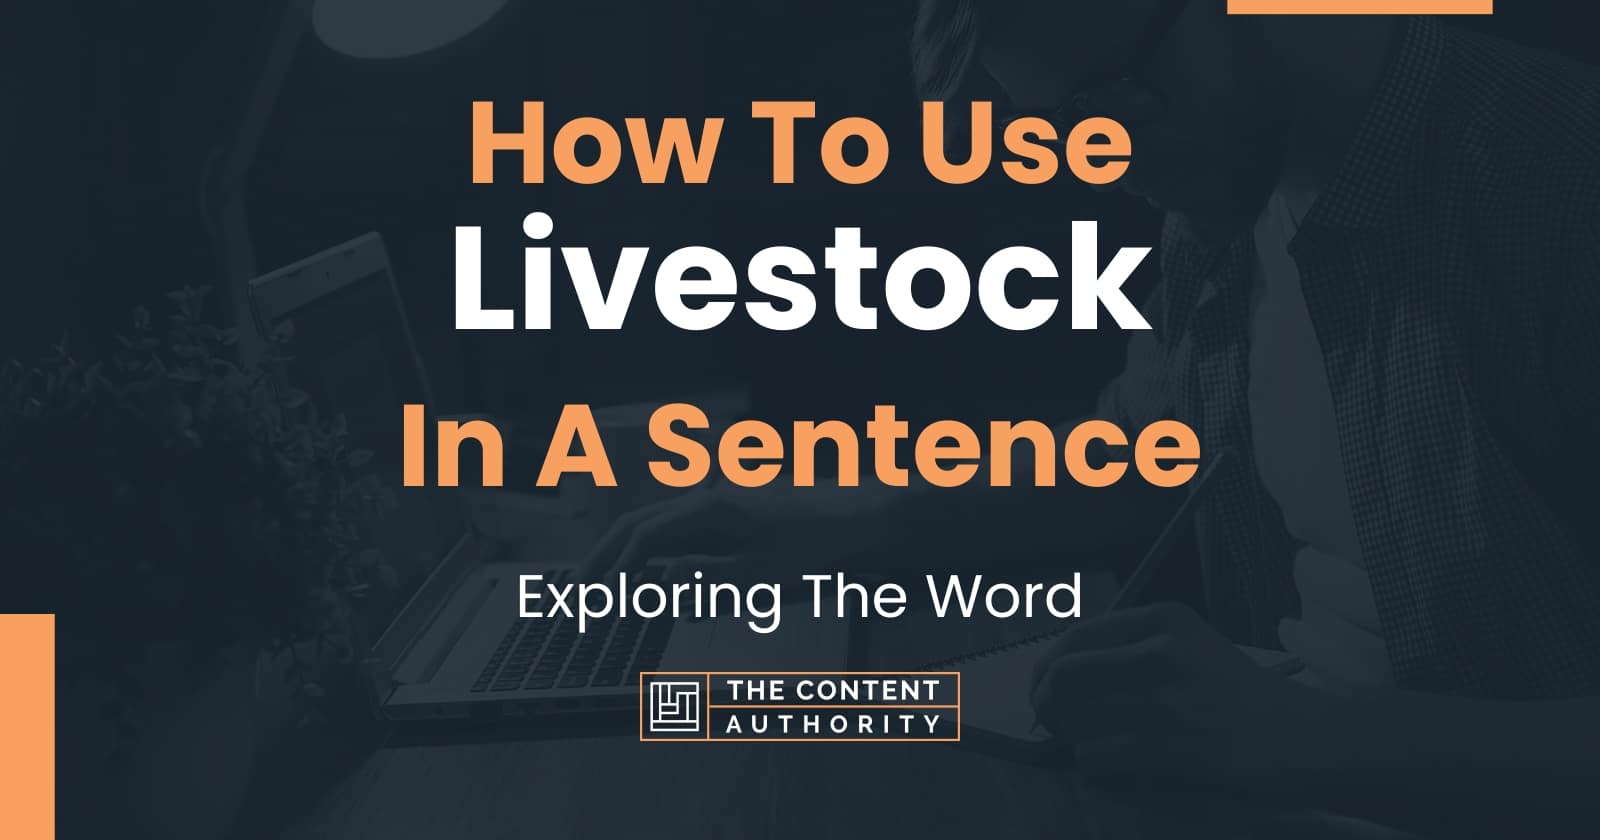 how-to-use-livestock-in-a-sentence-exploring-the-word